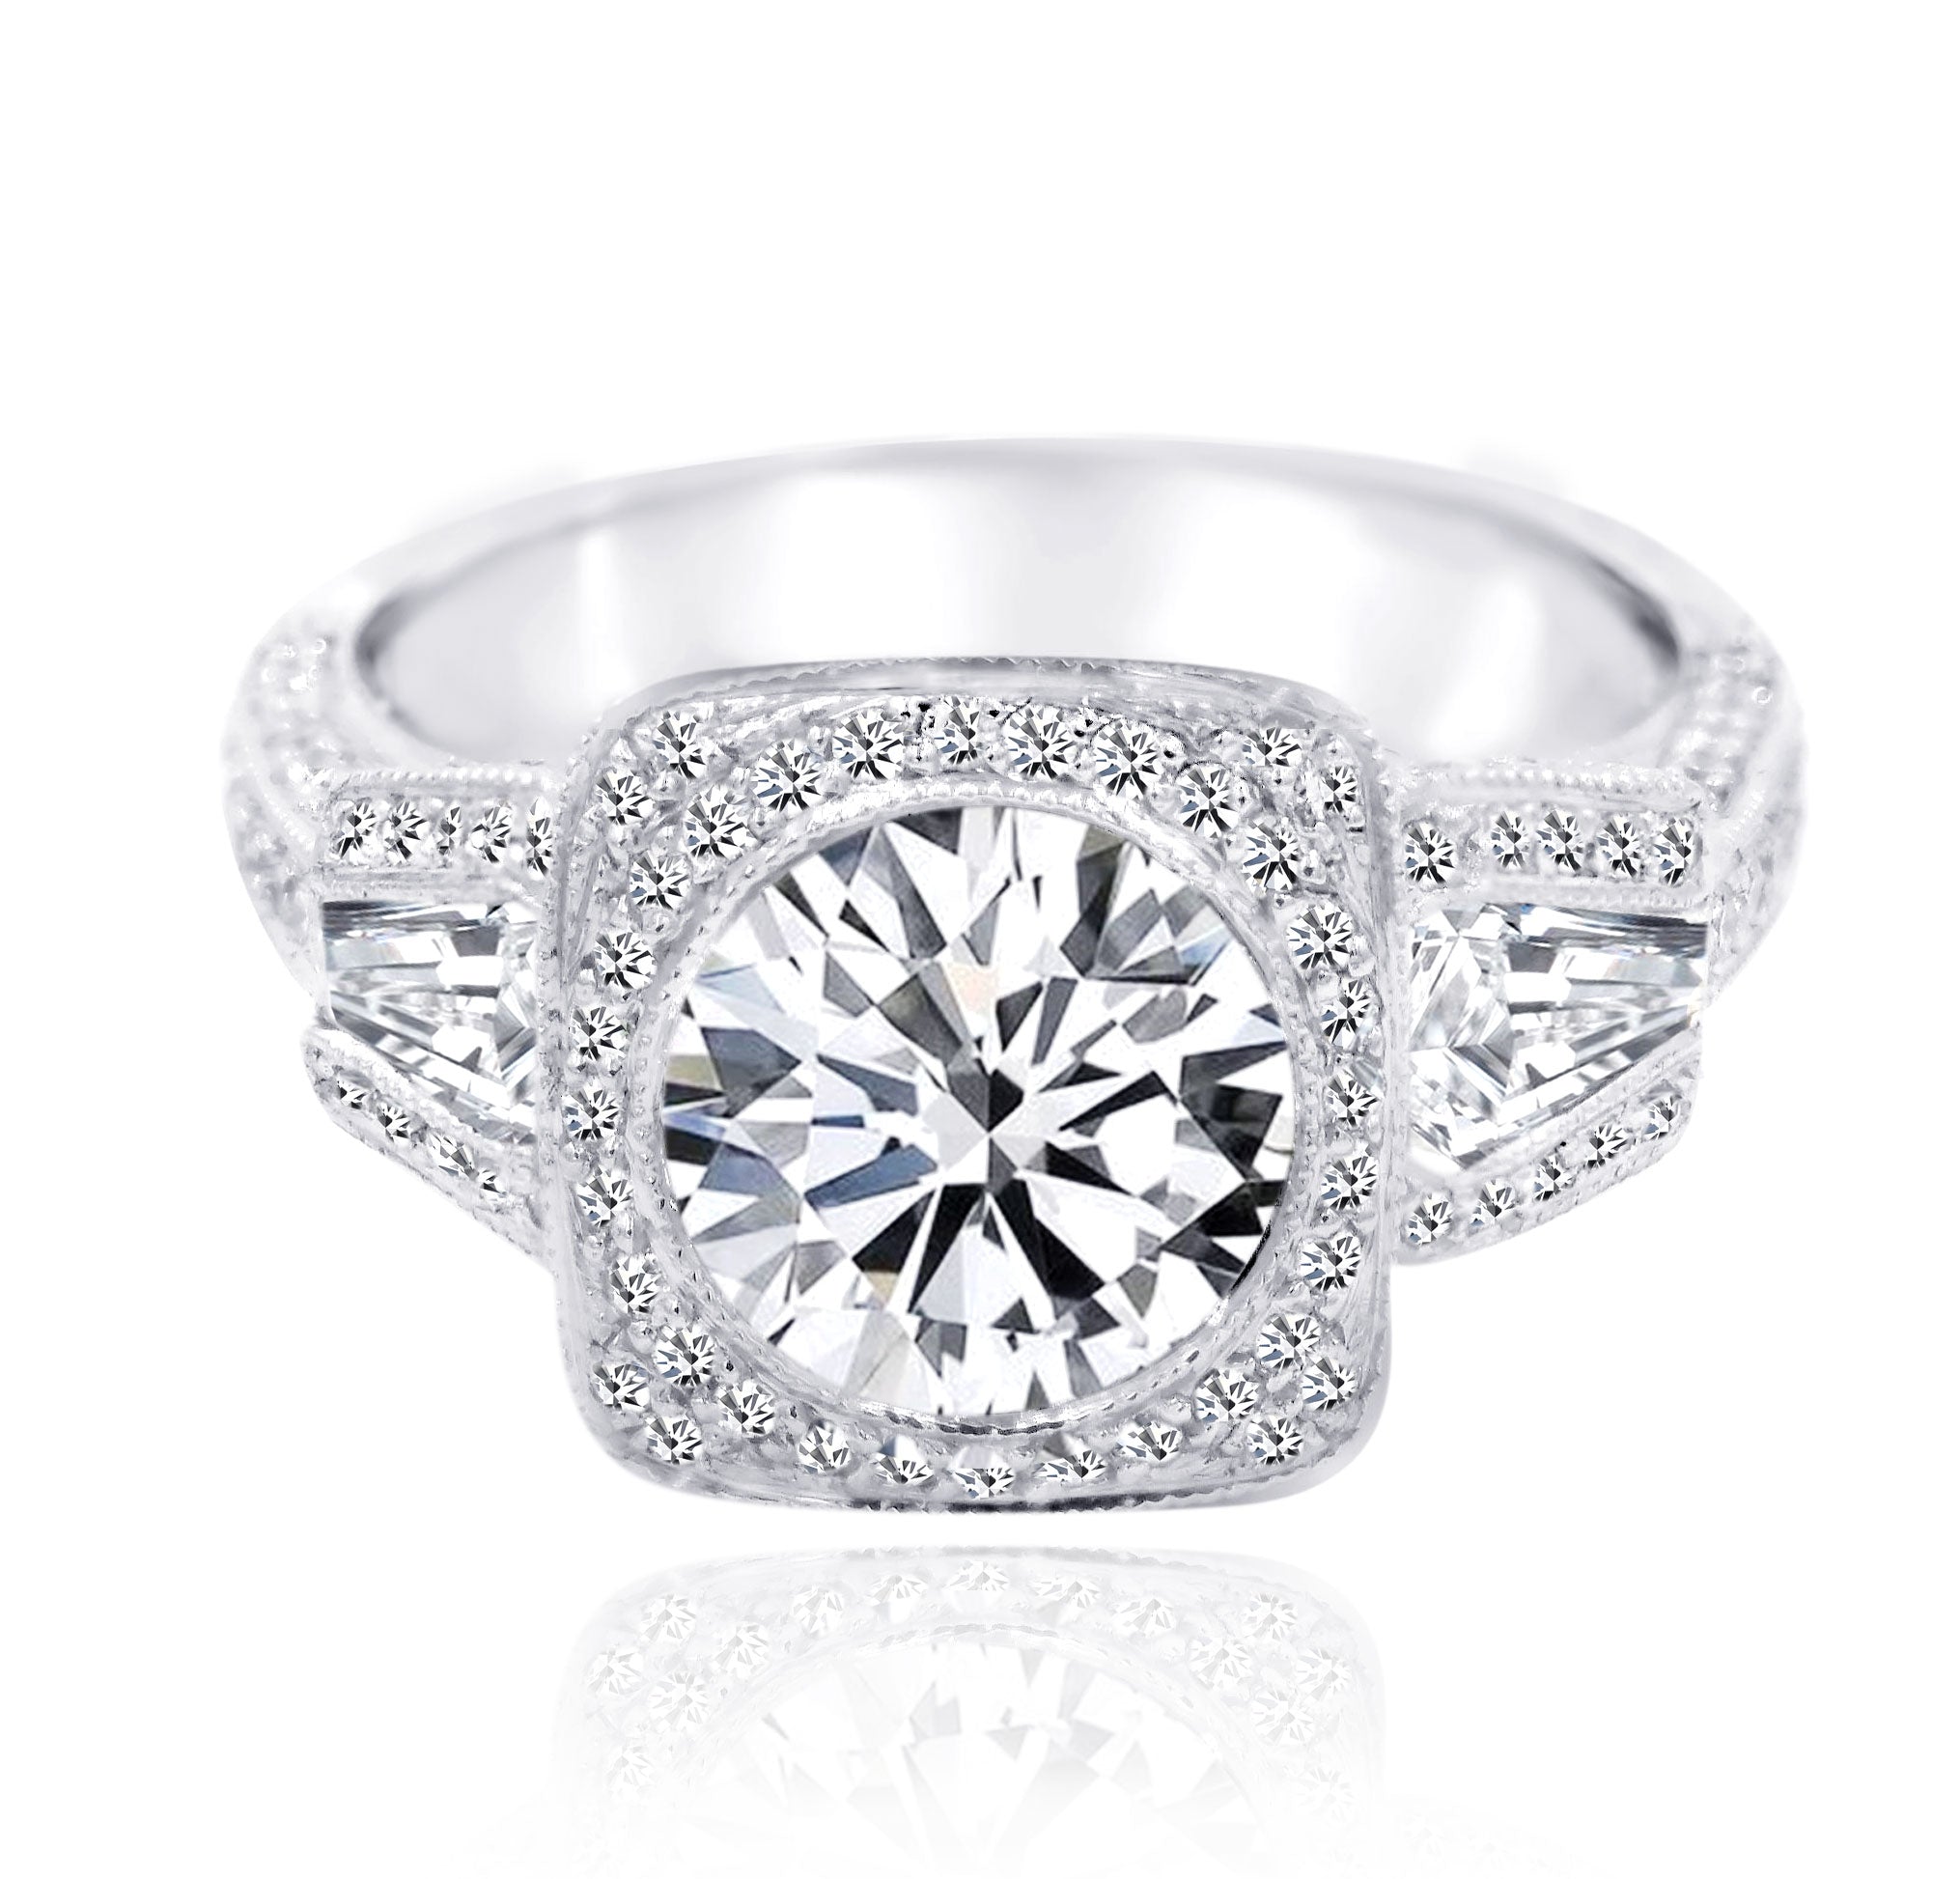 Why did my diamond ring cost $600 but is now worth $29? - Quora